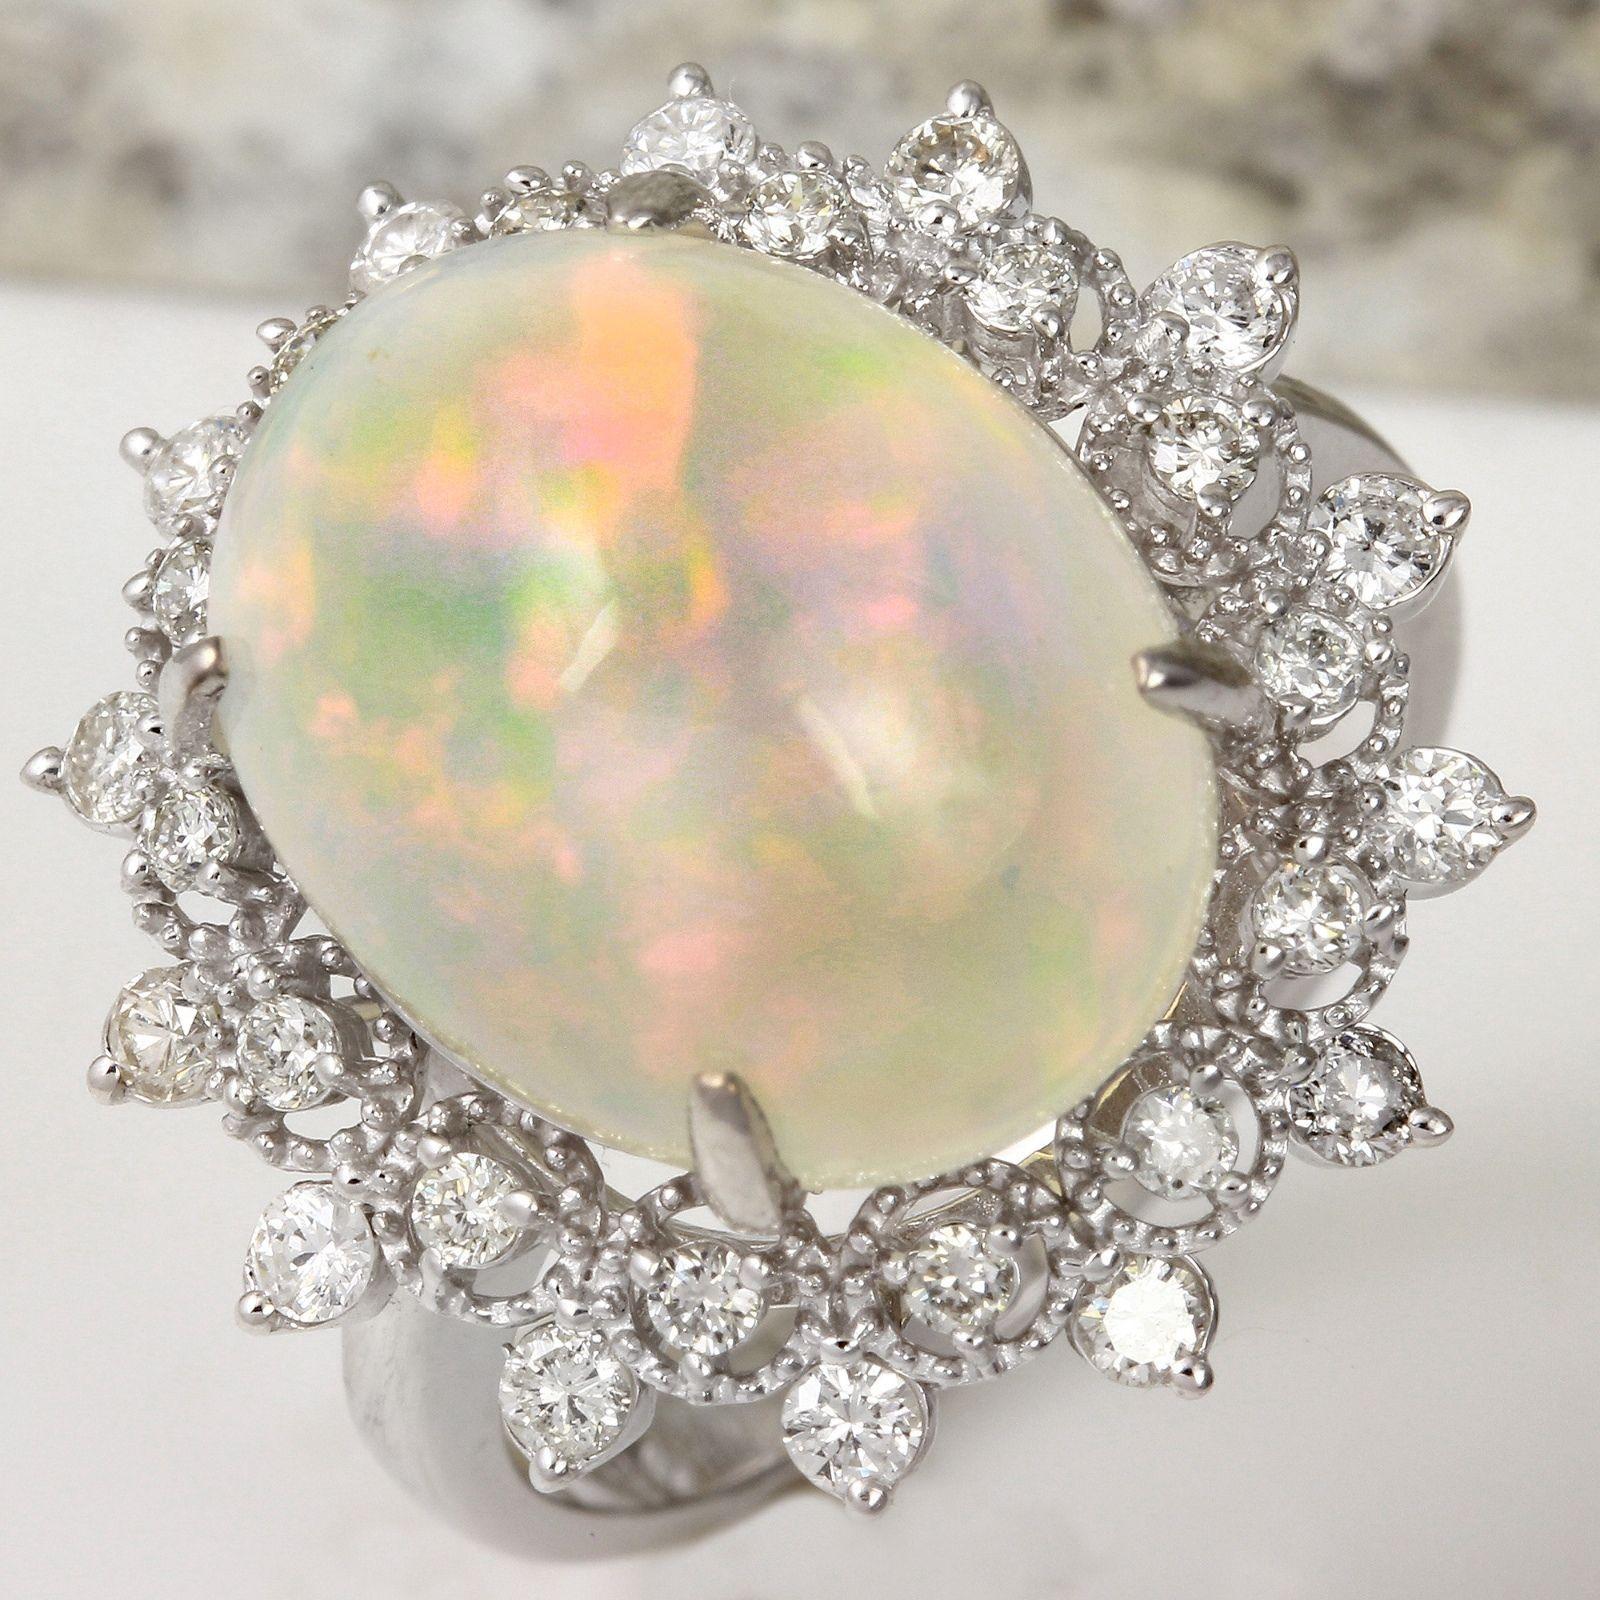 6.73 Carats Natural Impressive Ethiopian Opal and Diamond 14K Solid White Gold Ring

Total Natural Opal Weight is: Approx. 5.73 Carats

Opal Measures: Approx. 15.38 x 12.07mm

The head of the ring measures: Approx. 21.14 x 20.63mm

Total Natural